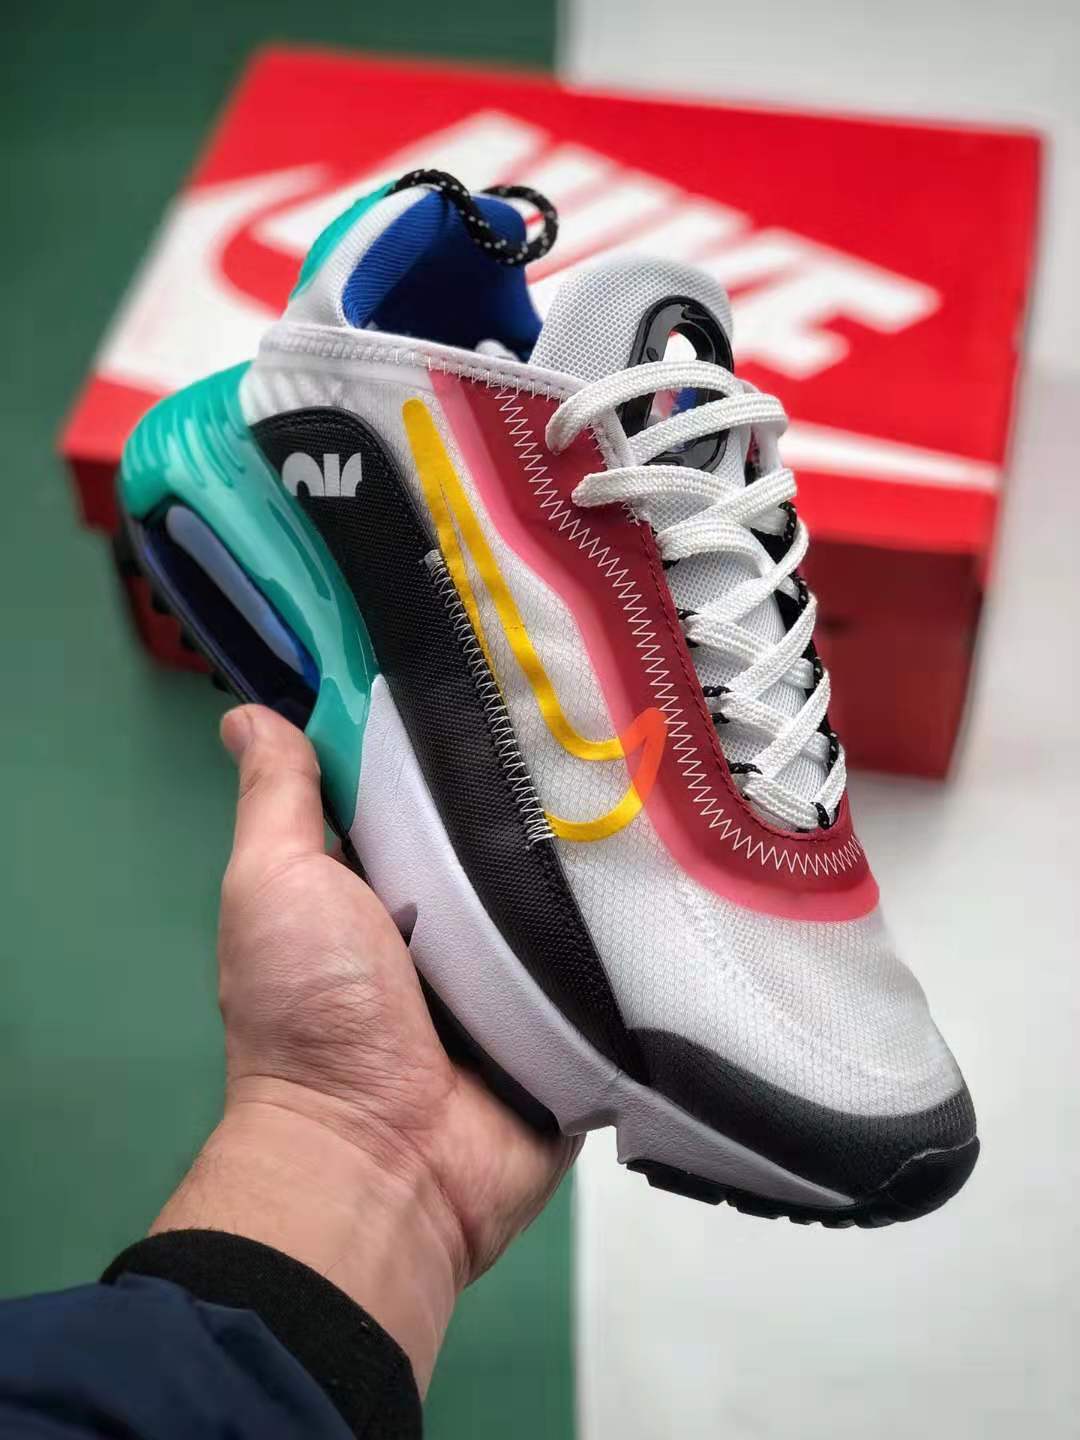 Nike Air Max 2090 White Red Black Treasure Blue Powder CT7698-010: Stylish and Iconic Sneakers for Modern Sneakerheads